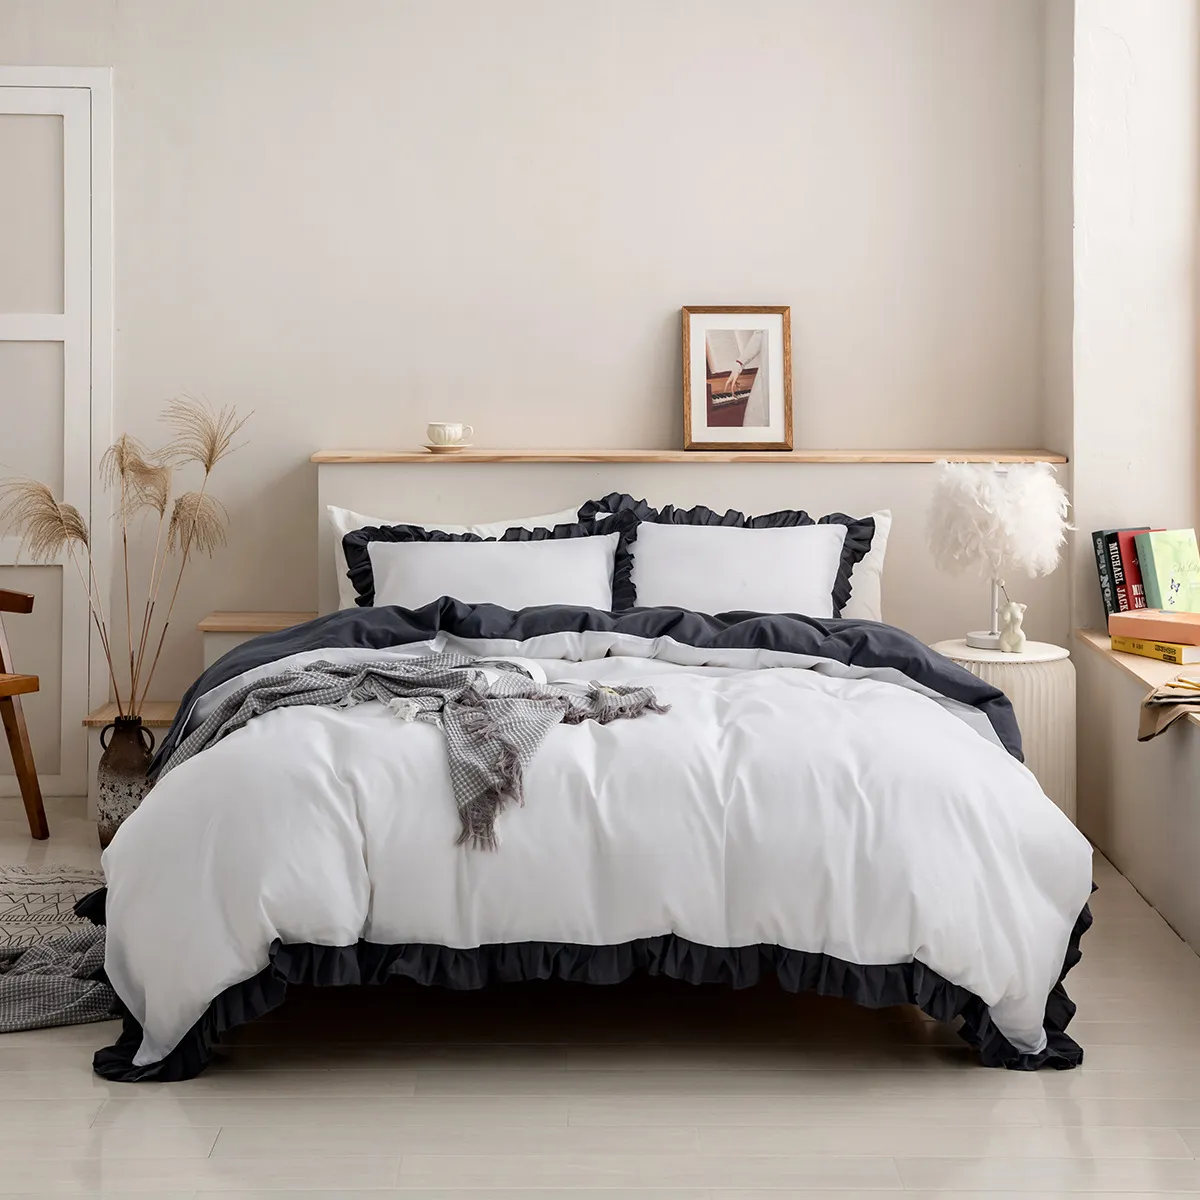 

2/3pcs Soft and Comfortable Solid Color Bedding Set,including Duvet Cover and Pillowcases